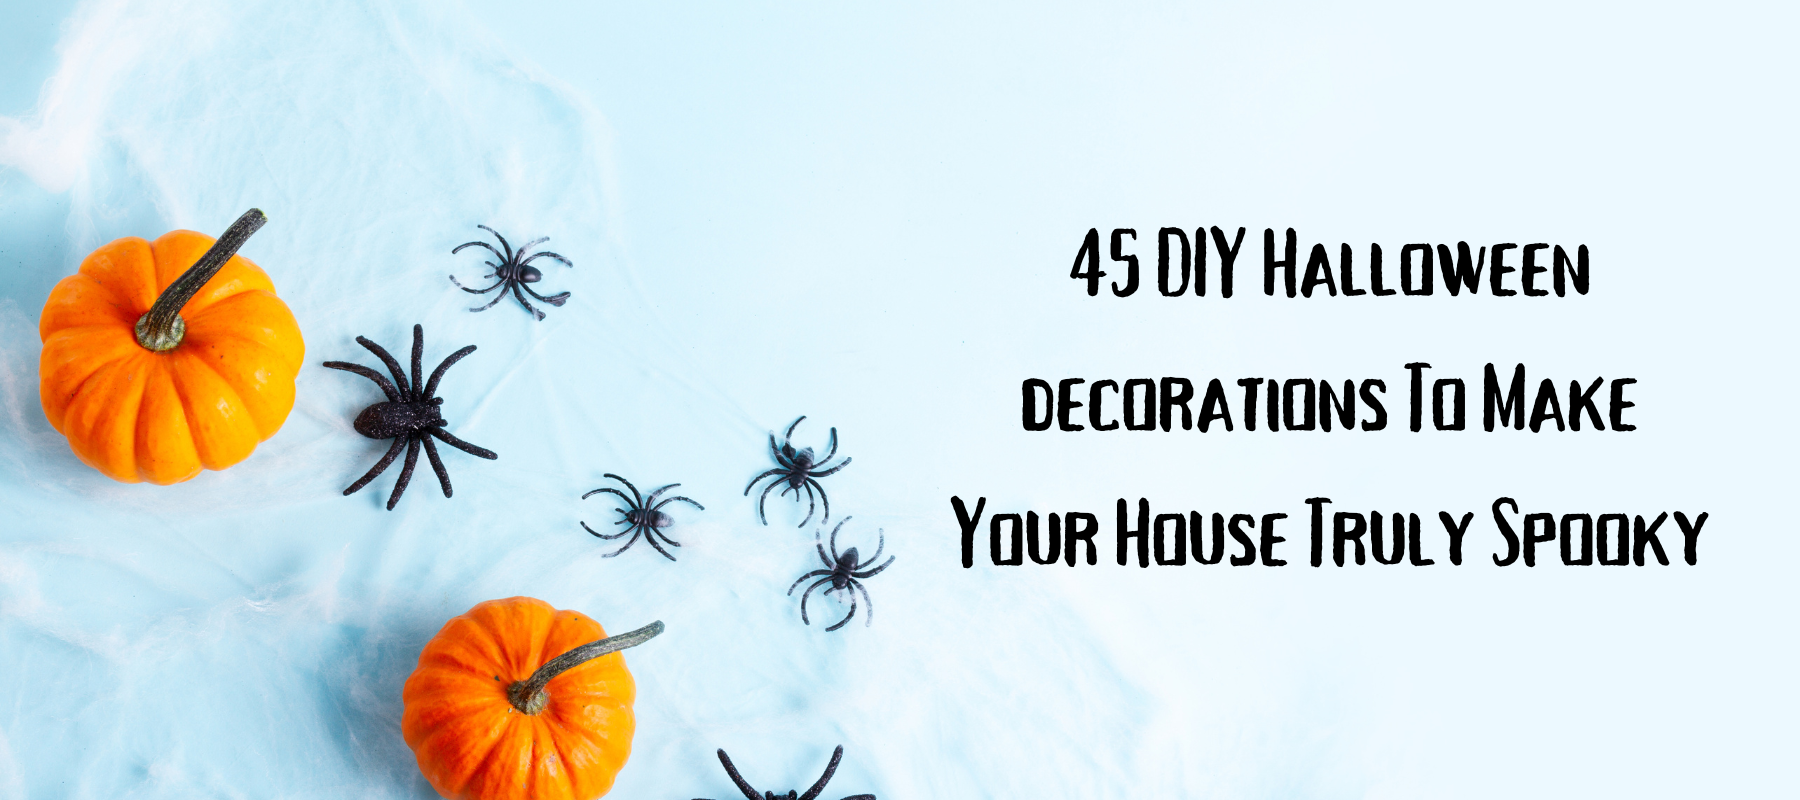 45 DIY Halloween decorations To Make Your House Truly Spooky